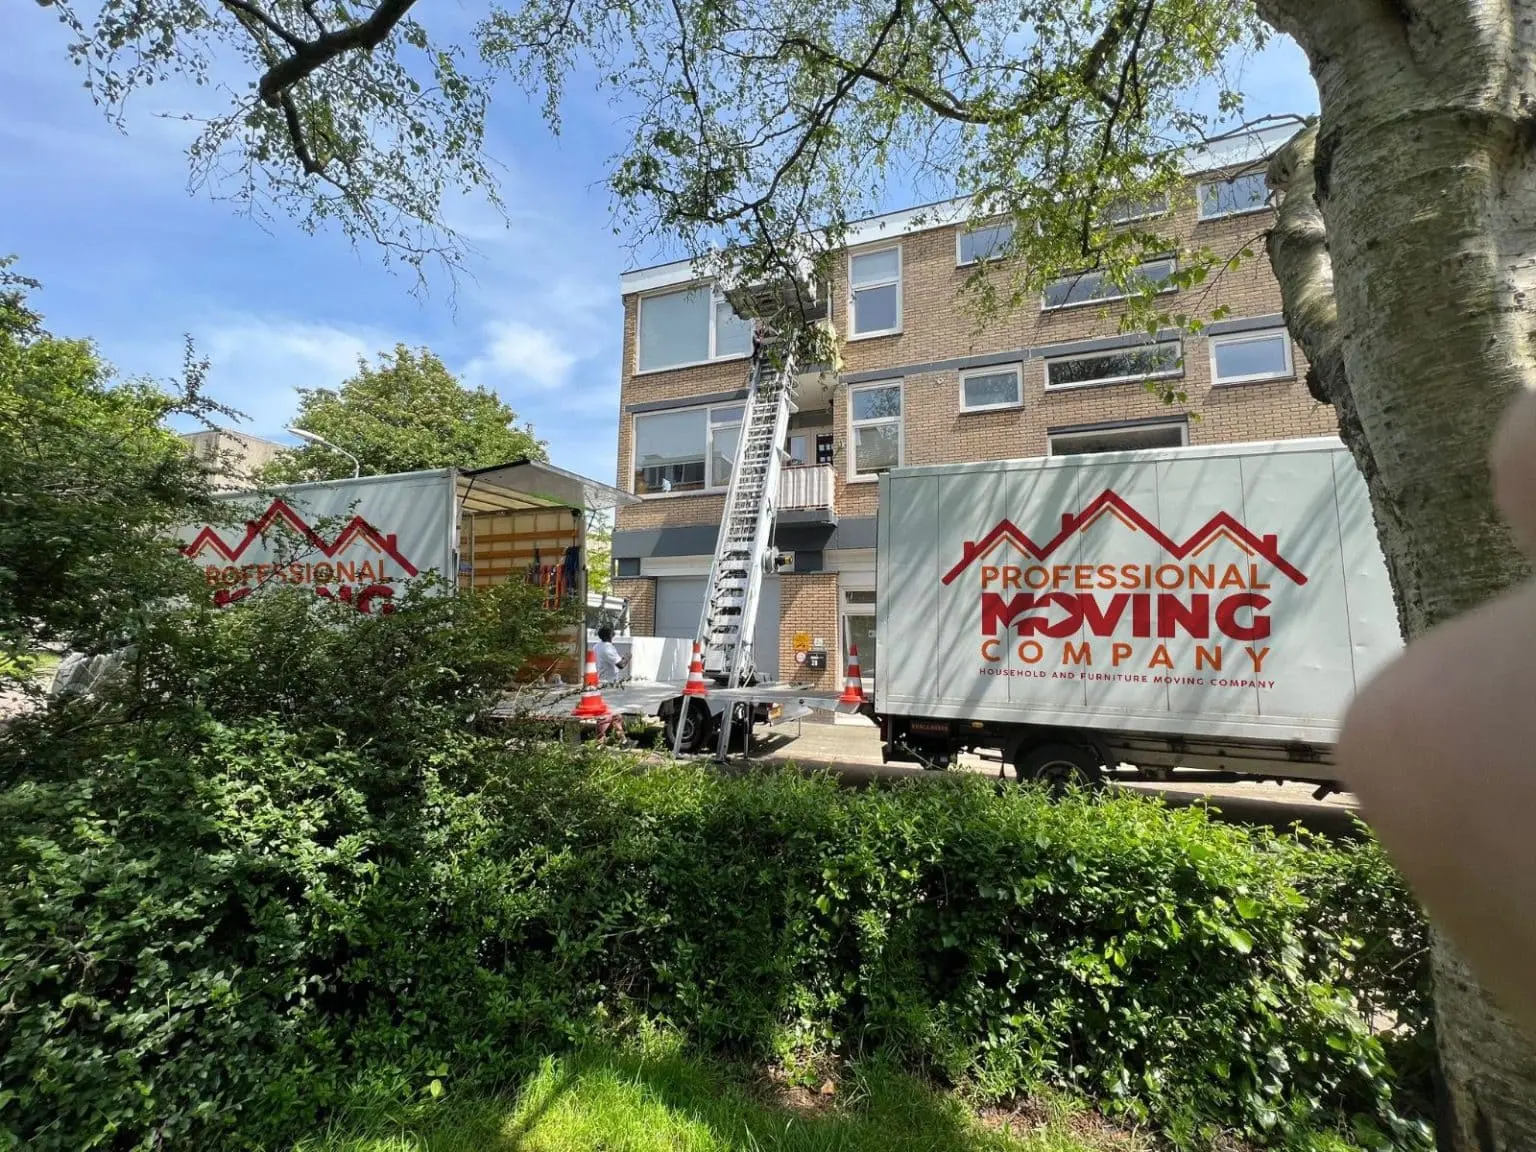 Moving Company Teylingen | Expert Piano Moving Services in Teylingen: Ensuring the Safe Transport of Your Instrument